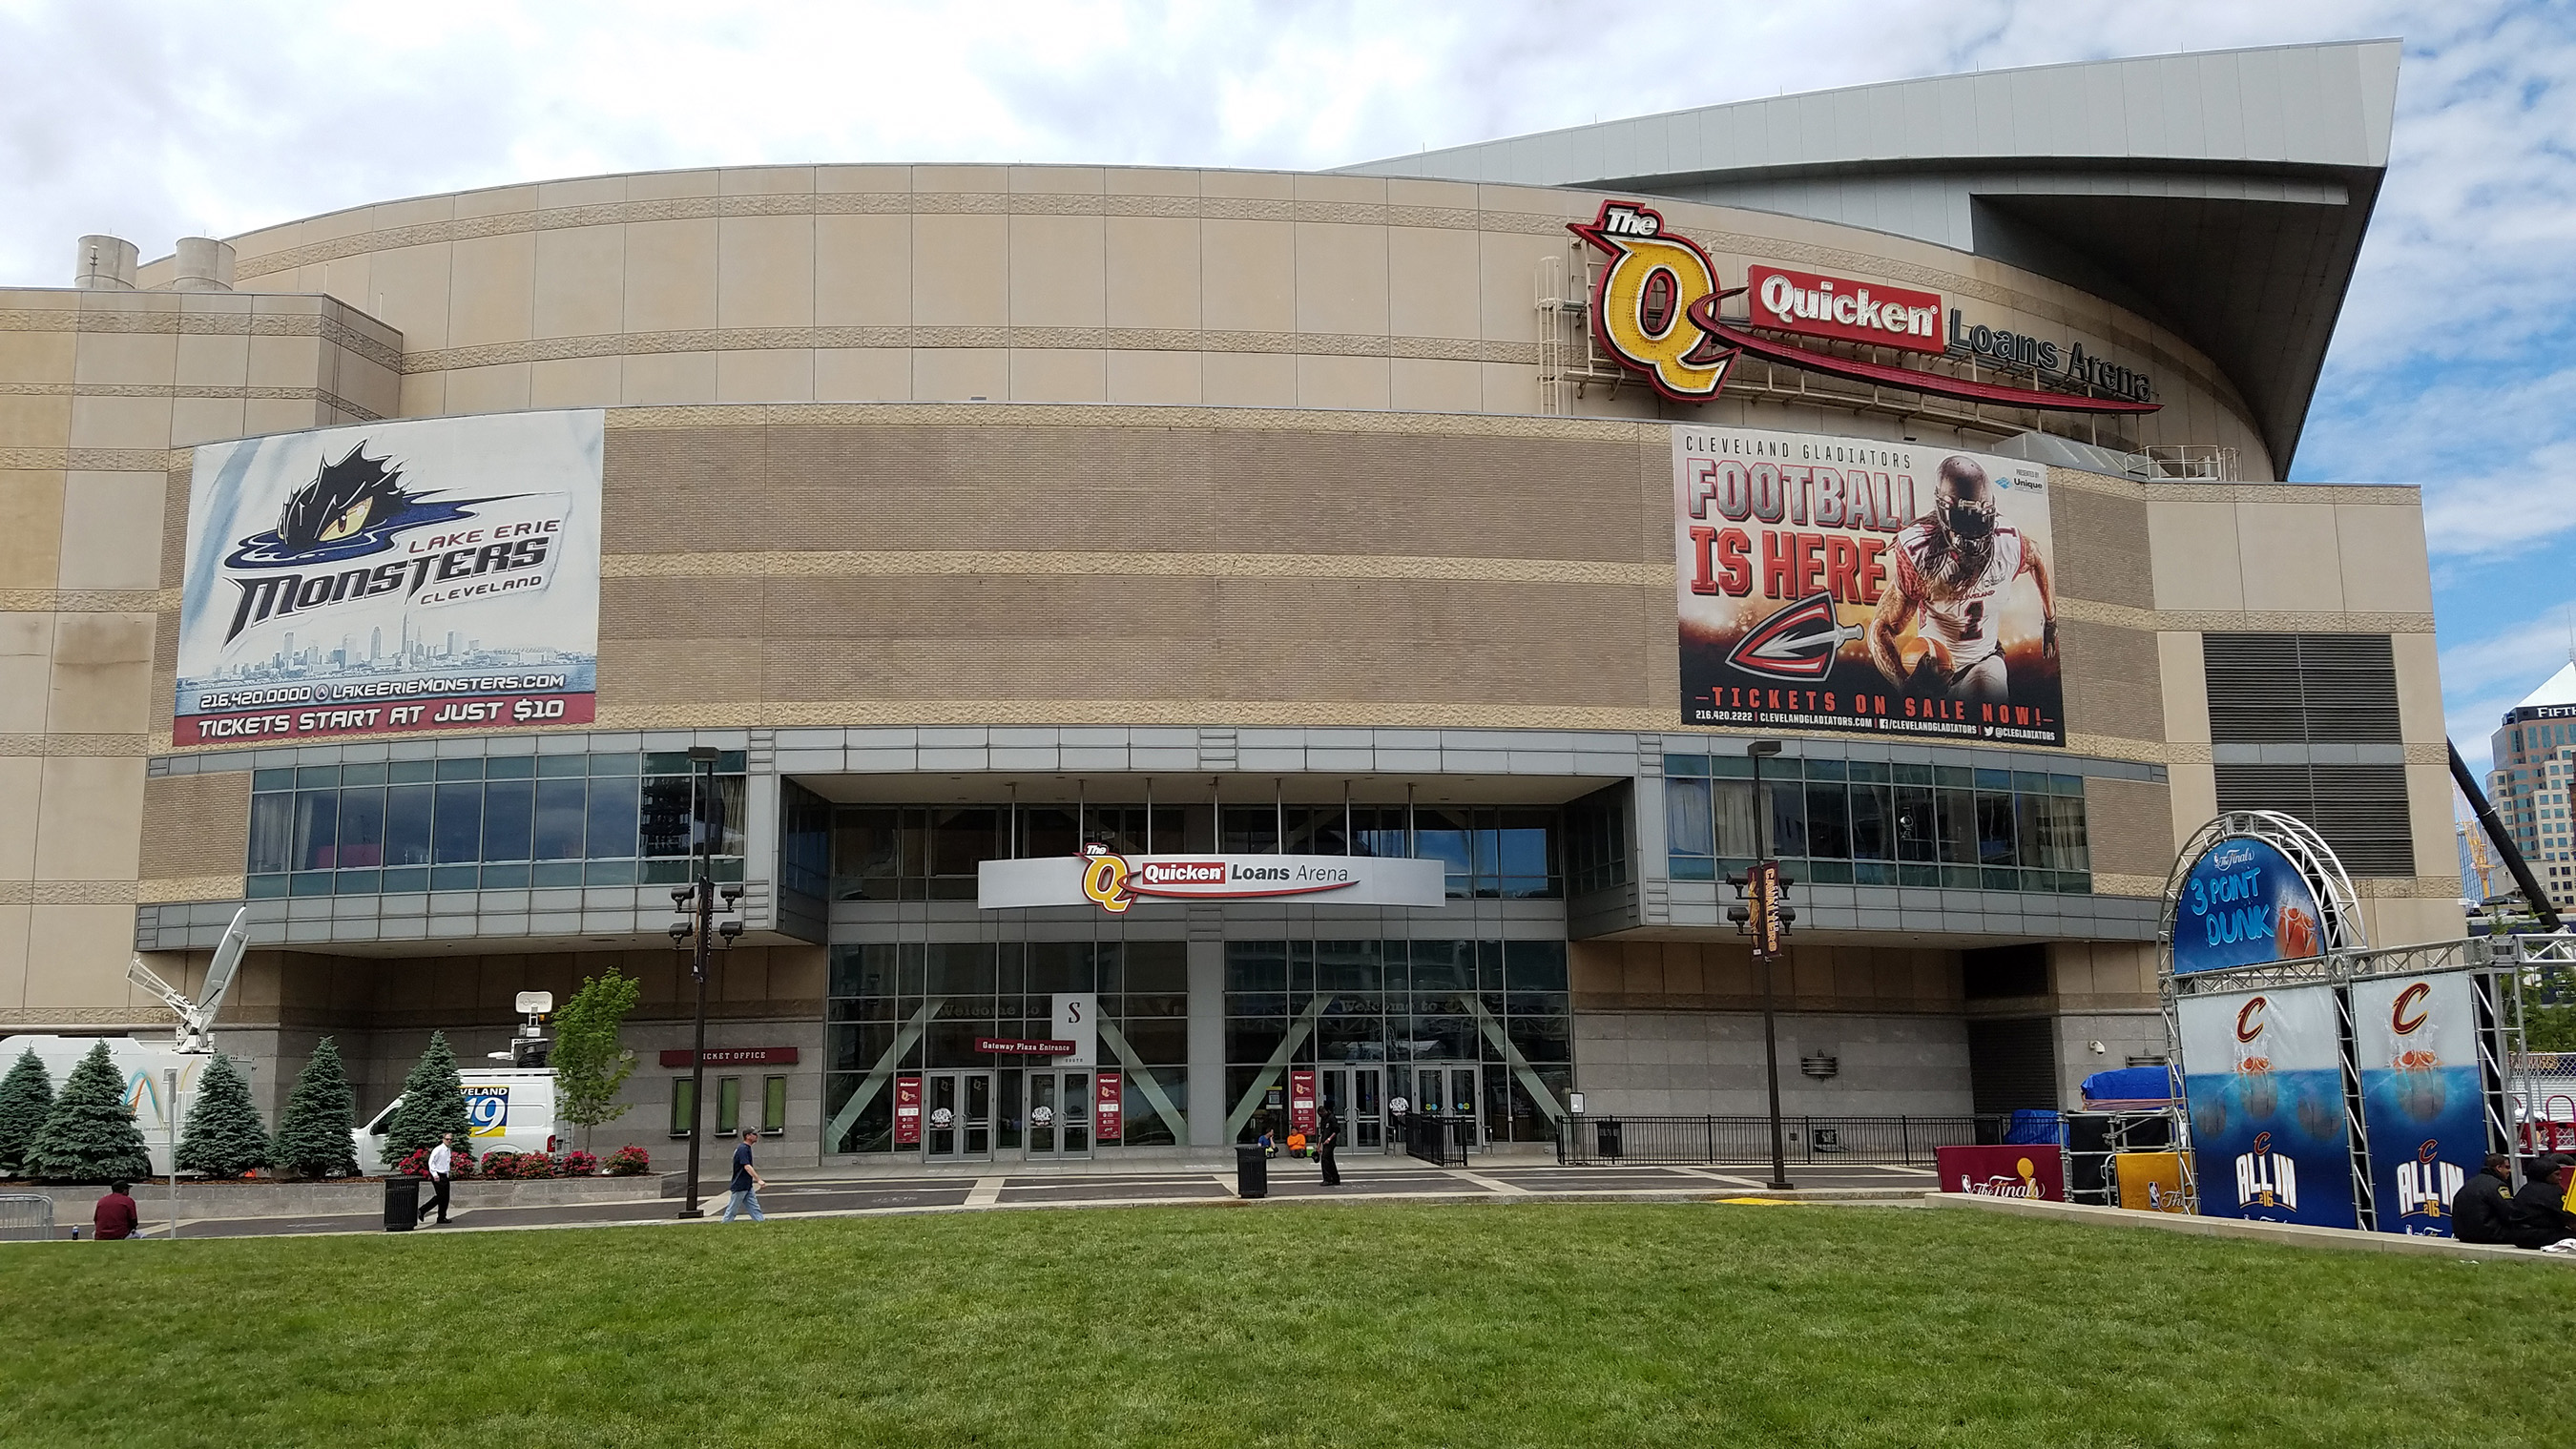 Verizon has upgraded their wireless network in and around Cleveland’s Quicken Loan Arena ahead of the Republican National Convention in July.